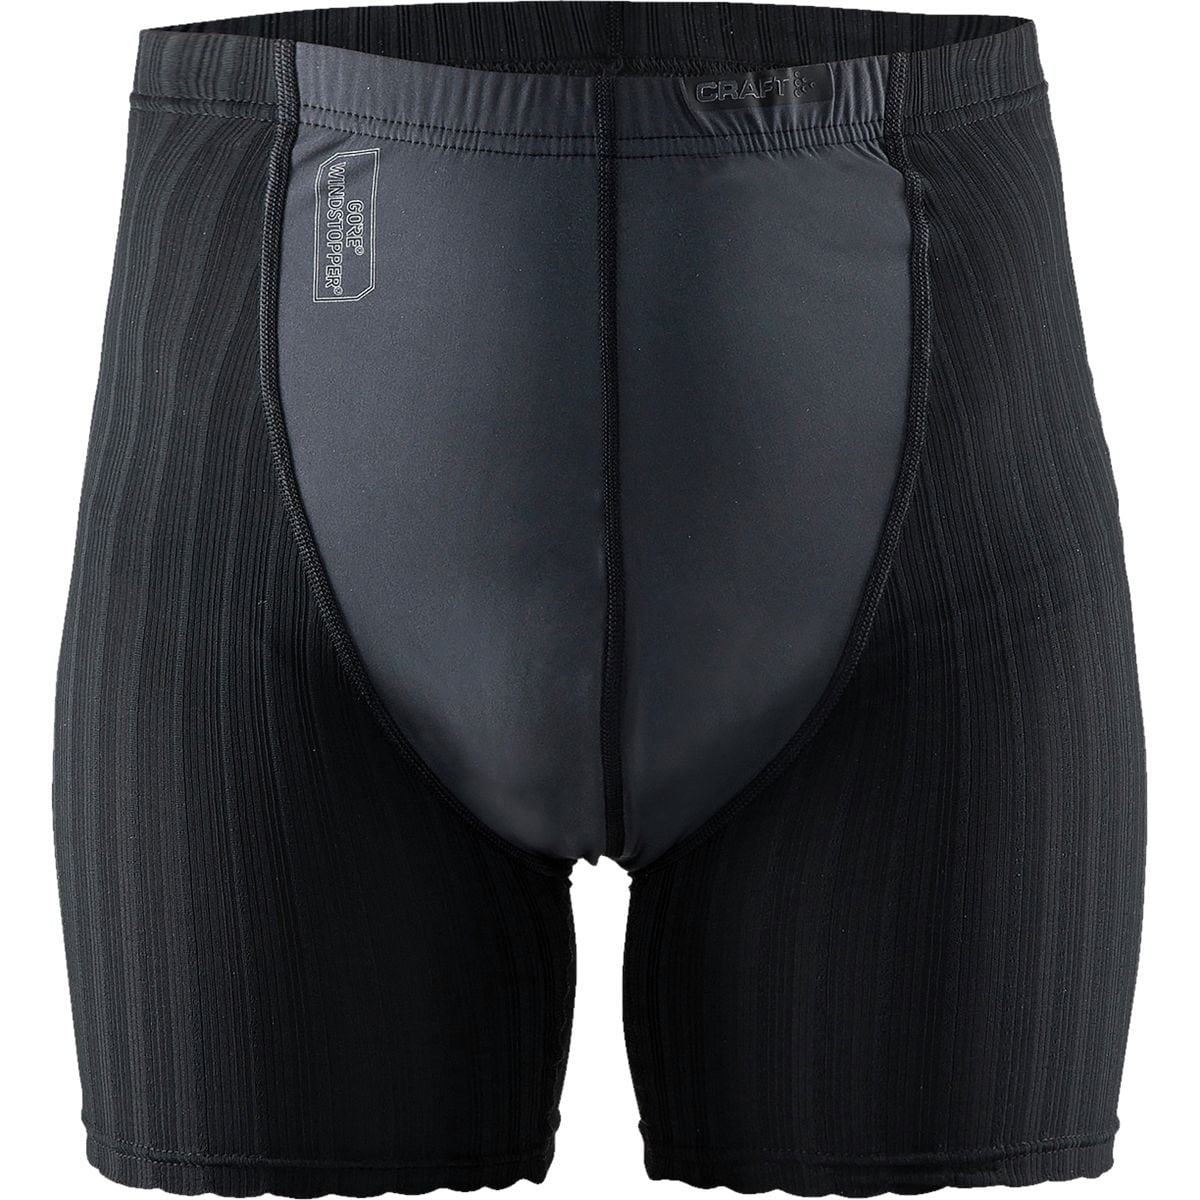 Craft Active Extreme 20 Windstopper Boxers Mens